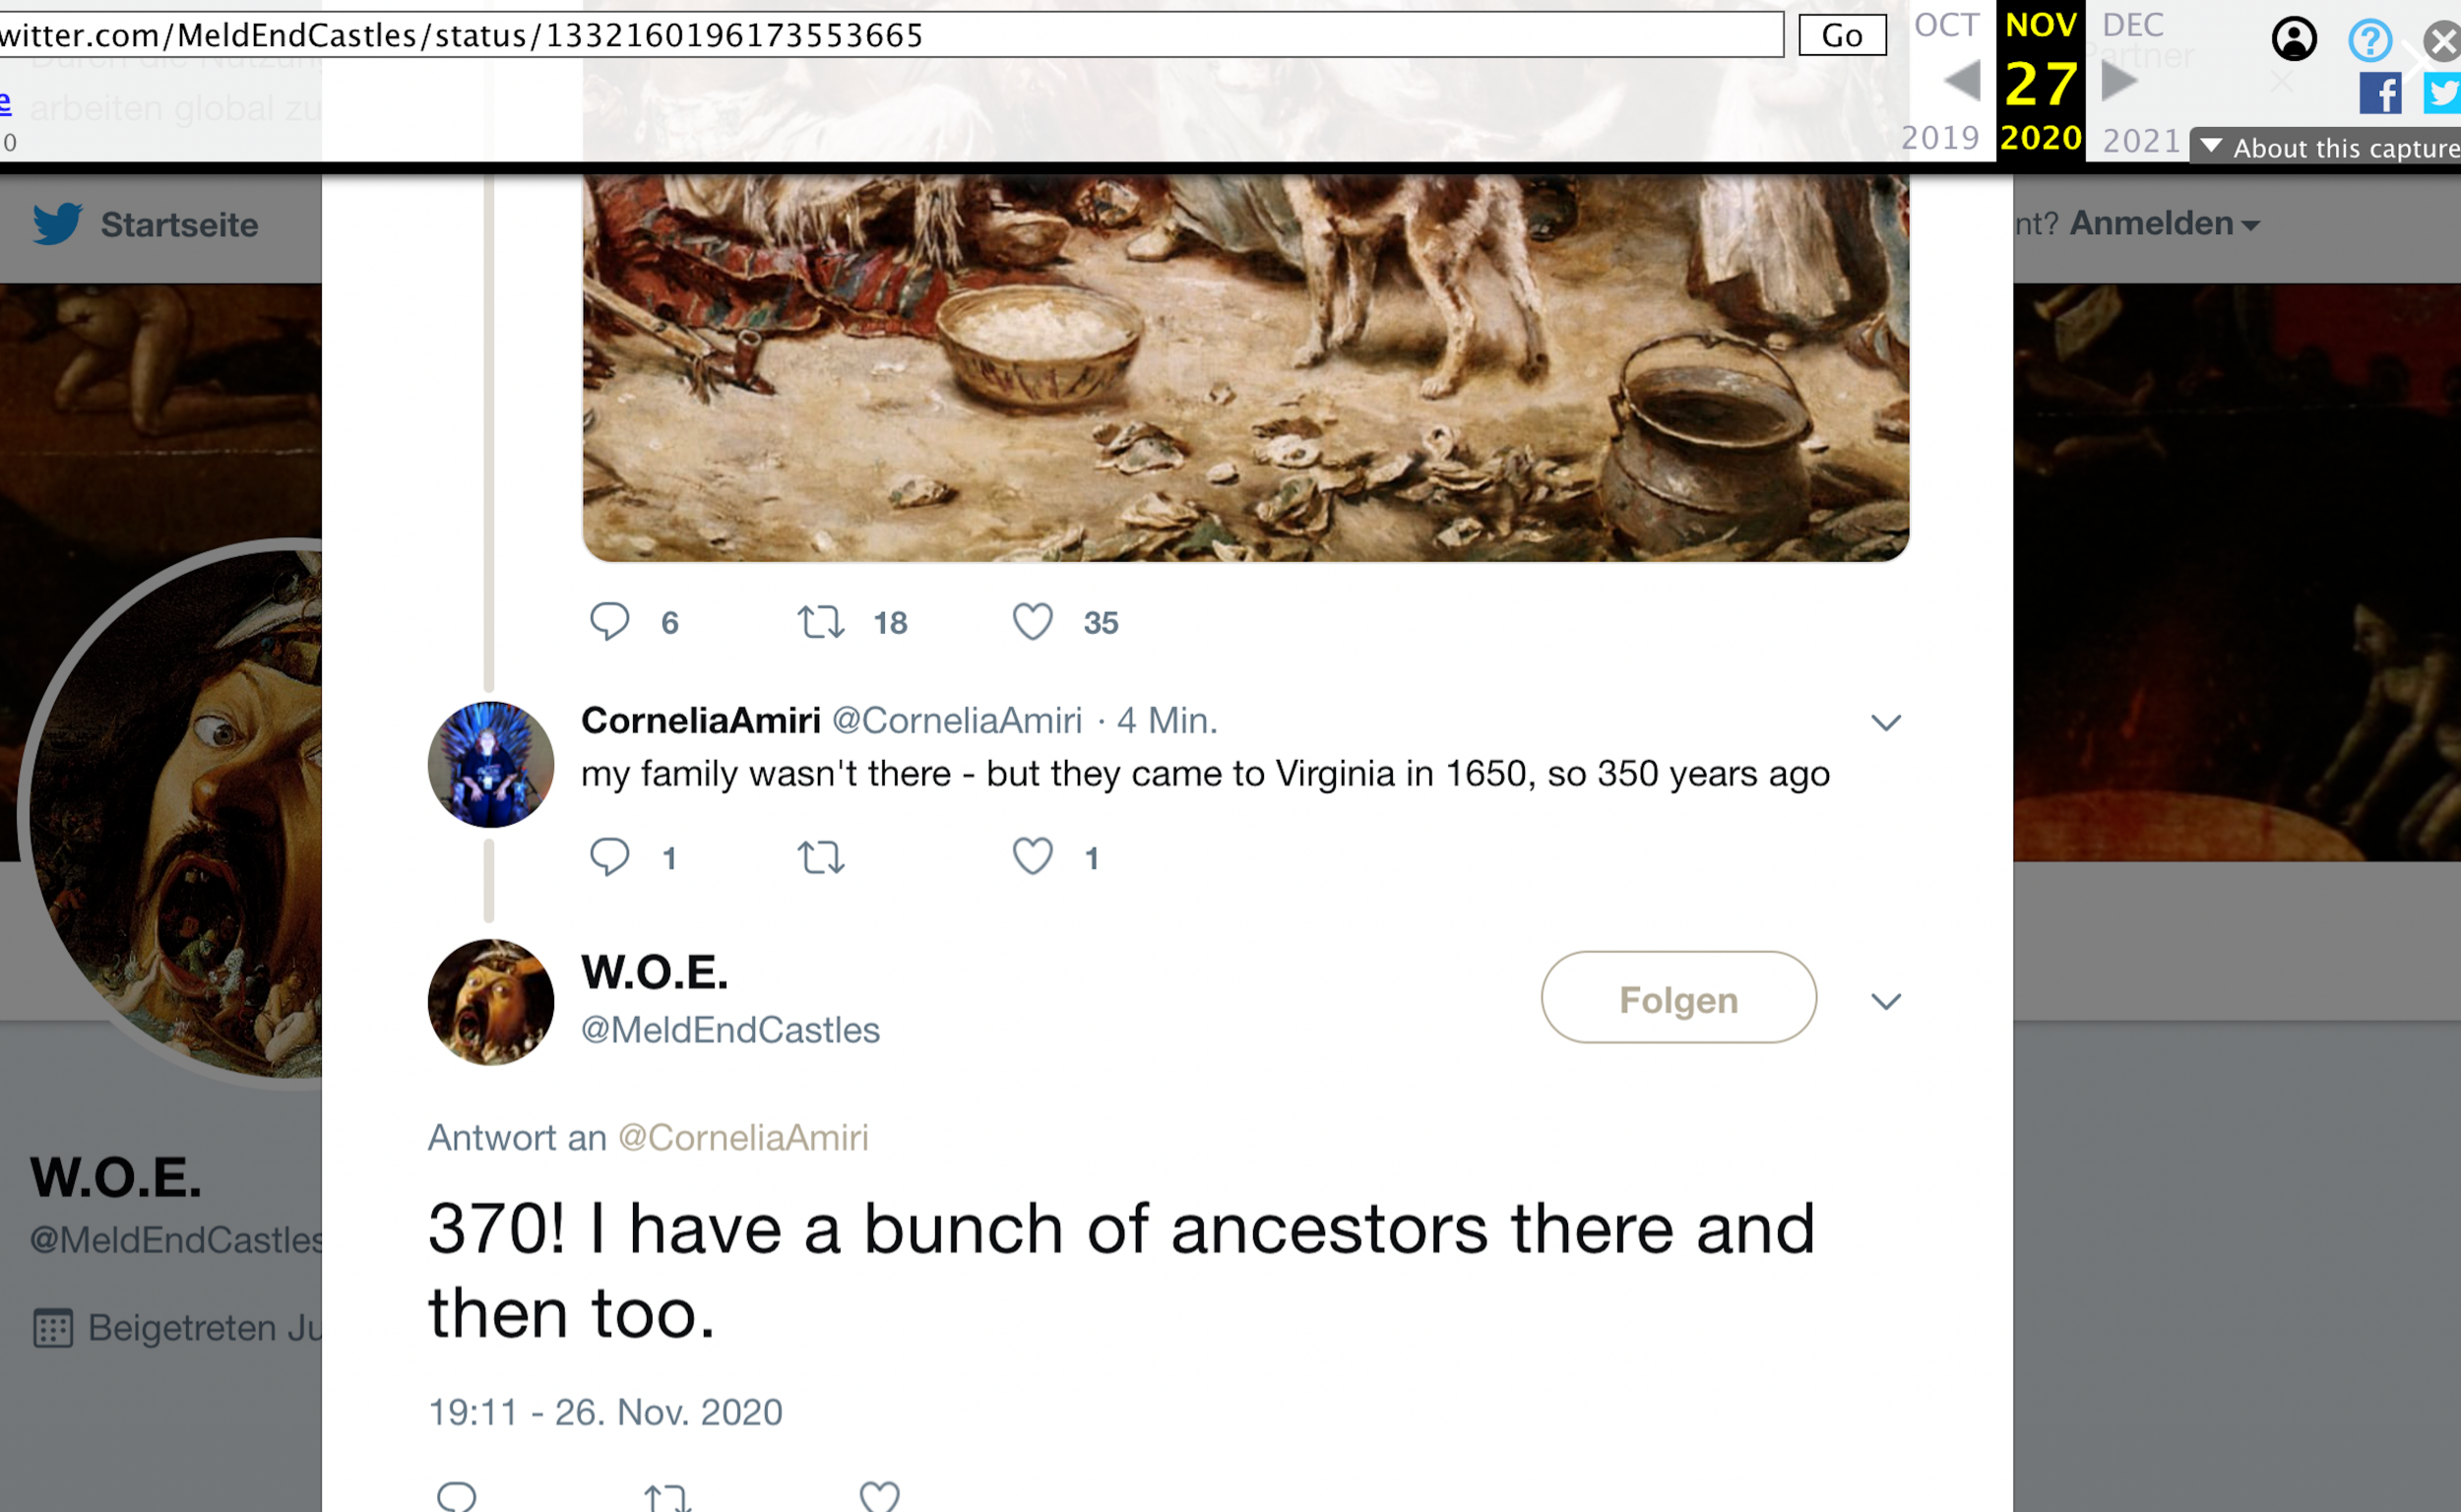 Woe saying that he has ancestors in Virginia dating to 1650. Replying to user CorneliaAmiri saying "My family wasn't there - but they came to Virginia in 1650, so 350 years ago." Above that is cropped out painting of Pilgrims meeting the native Americans on the first Thanskgiving.